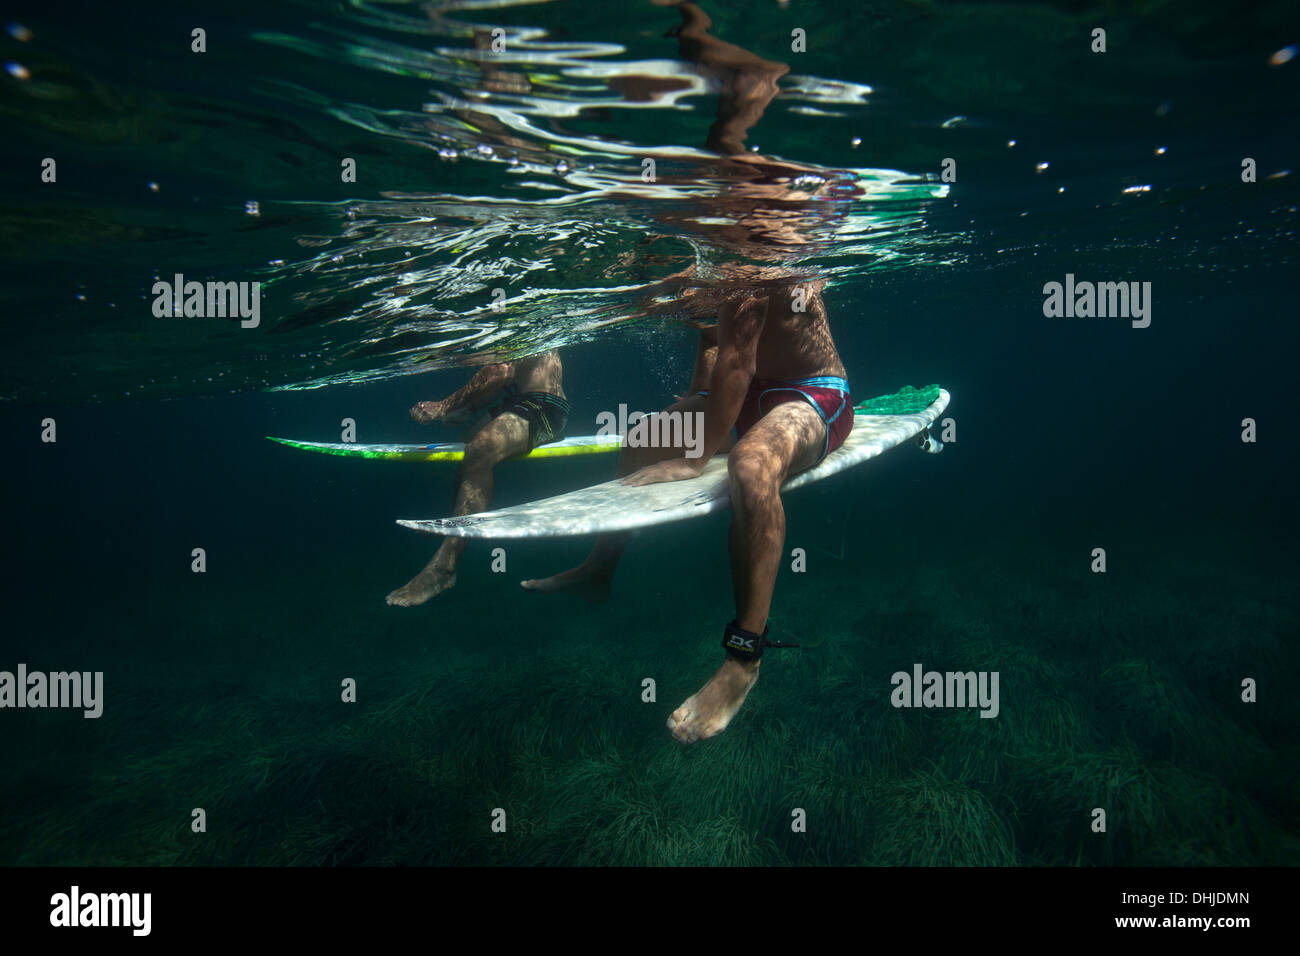 Underwater view of two surfers Stock Photo